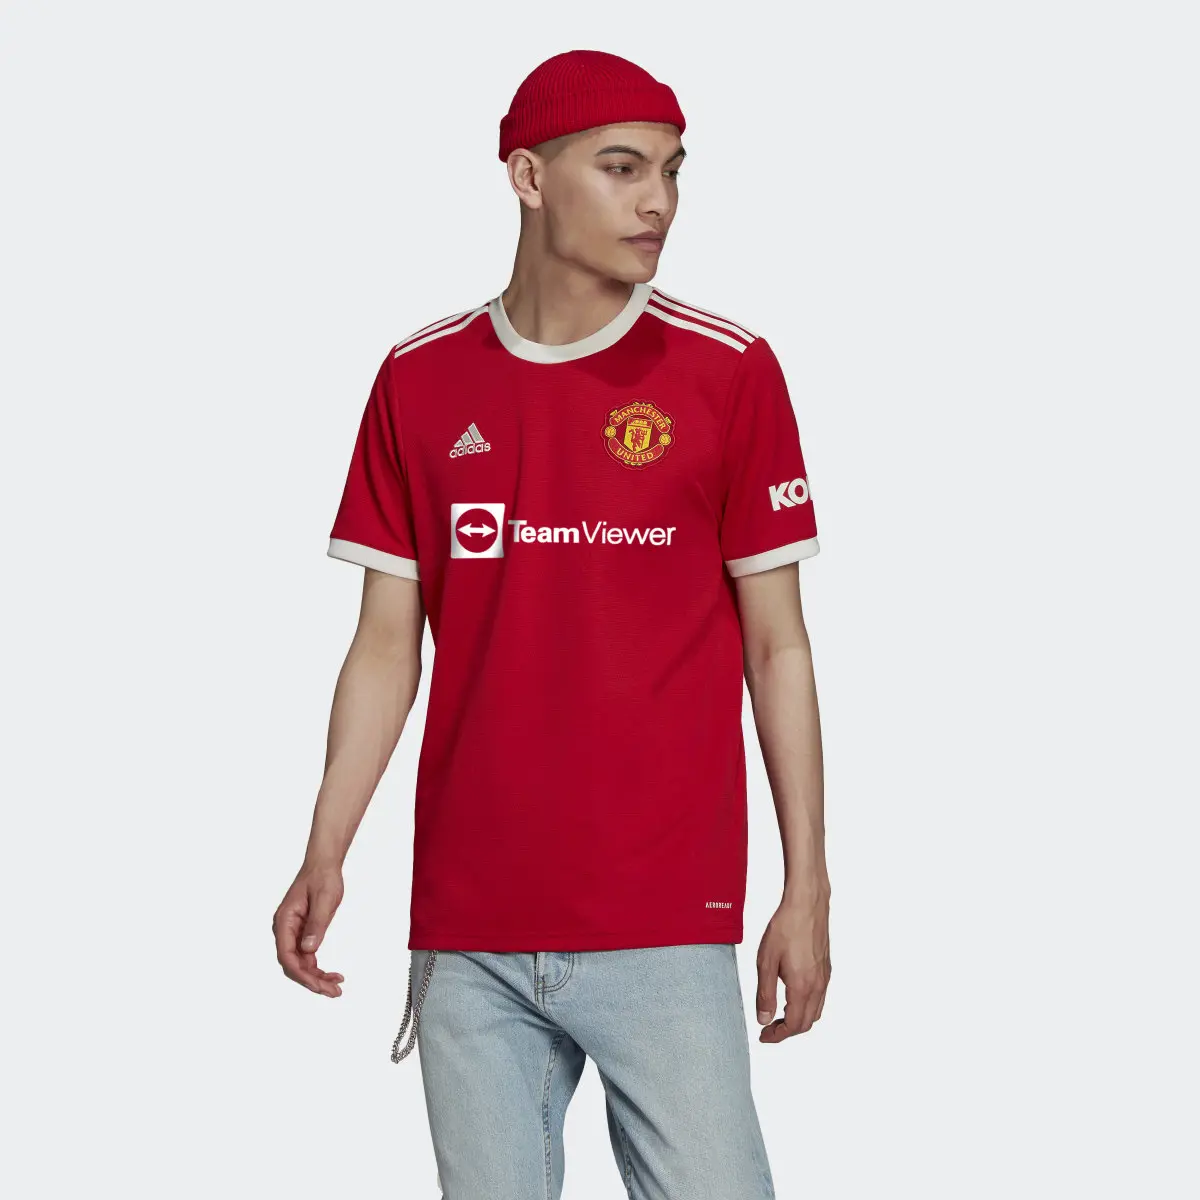 Adidas Manchester United 21/22 Home Jersey. 2